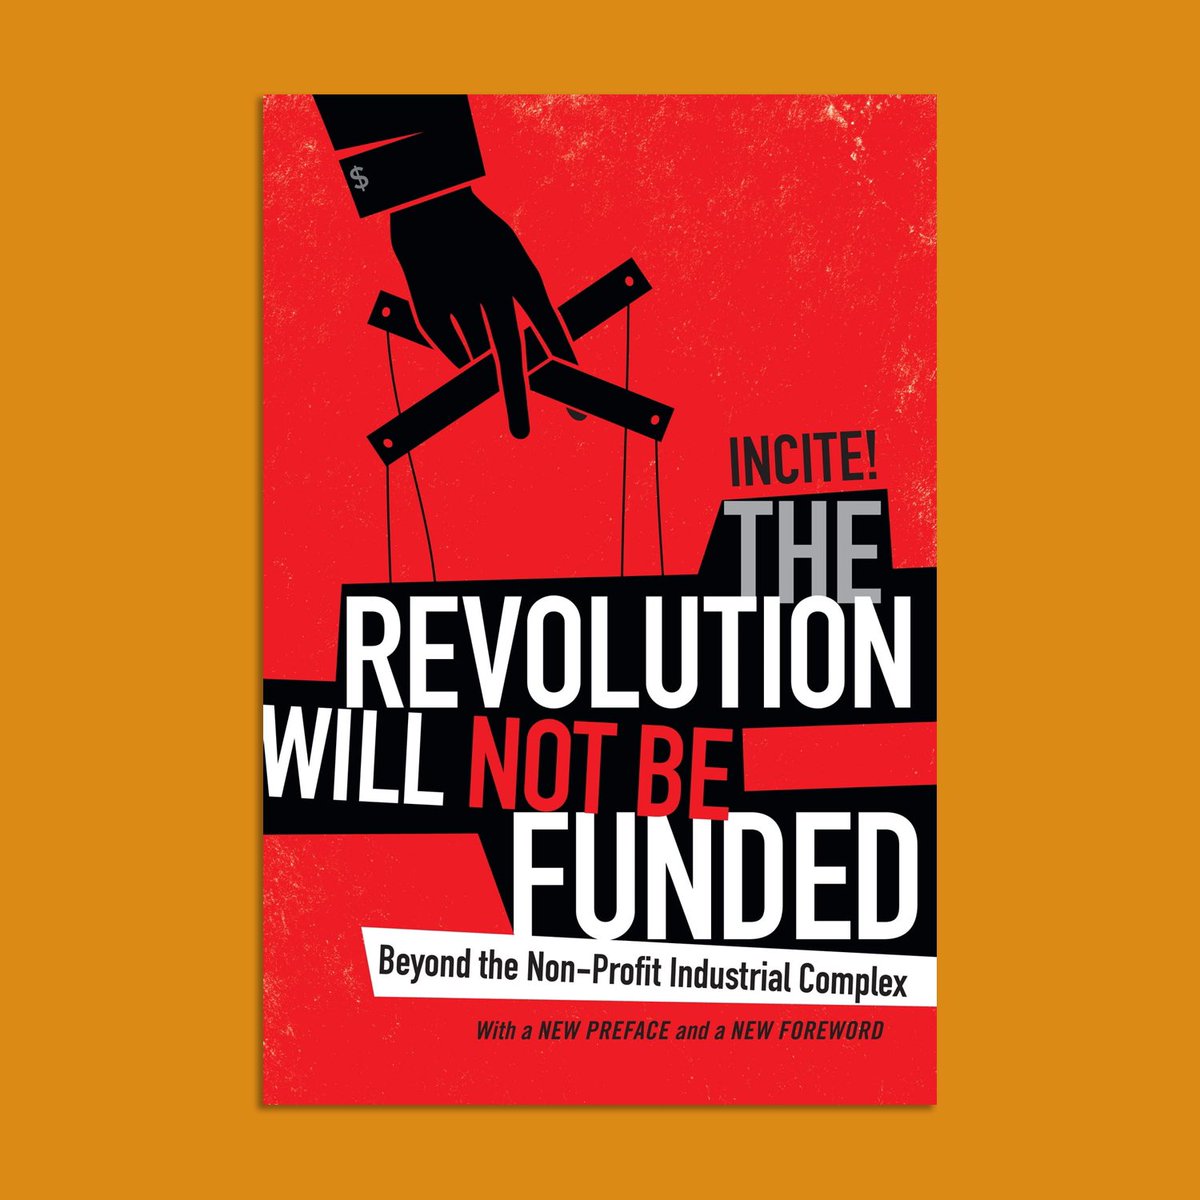 VIRTUAL BOOK CLUB ALERT - The Revolution Will Not Be Funded: Beyond the Nonprofit Industrial Complex - March 4th at 3pm. Reply or DM if interested.